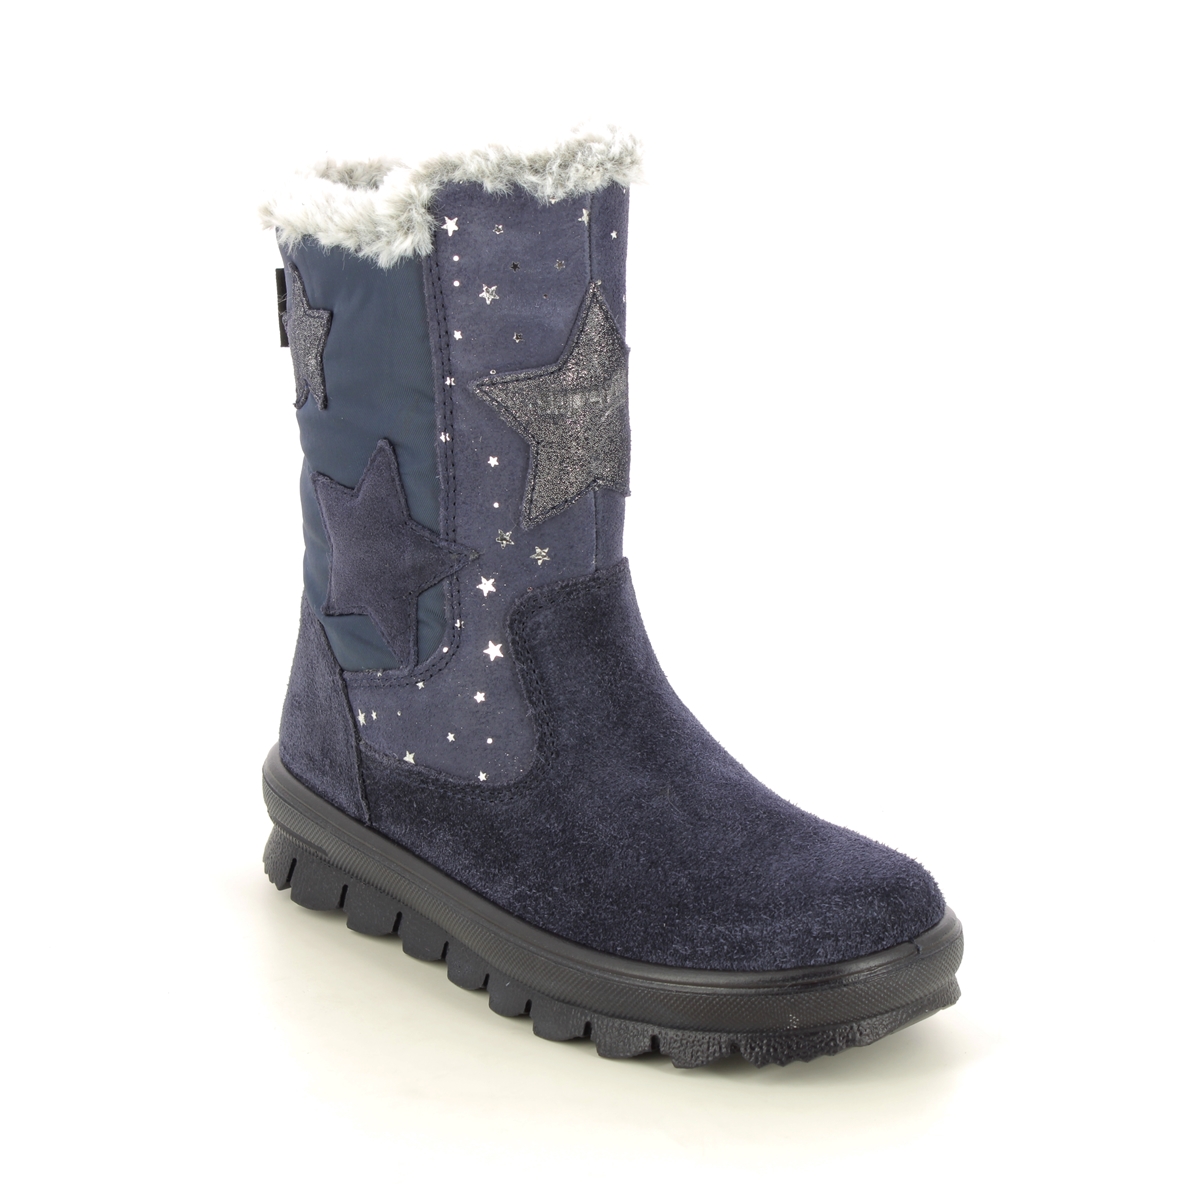 Superfit Flavia Star Gtx Navy Suede Kids Girls Boots 1000219-8000 In Size 29 In Plain Navy Suede For kids